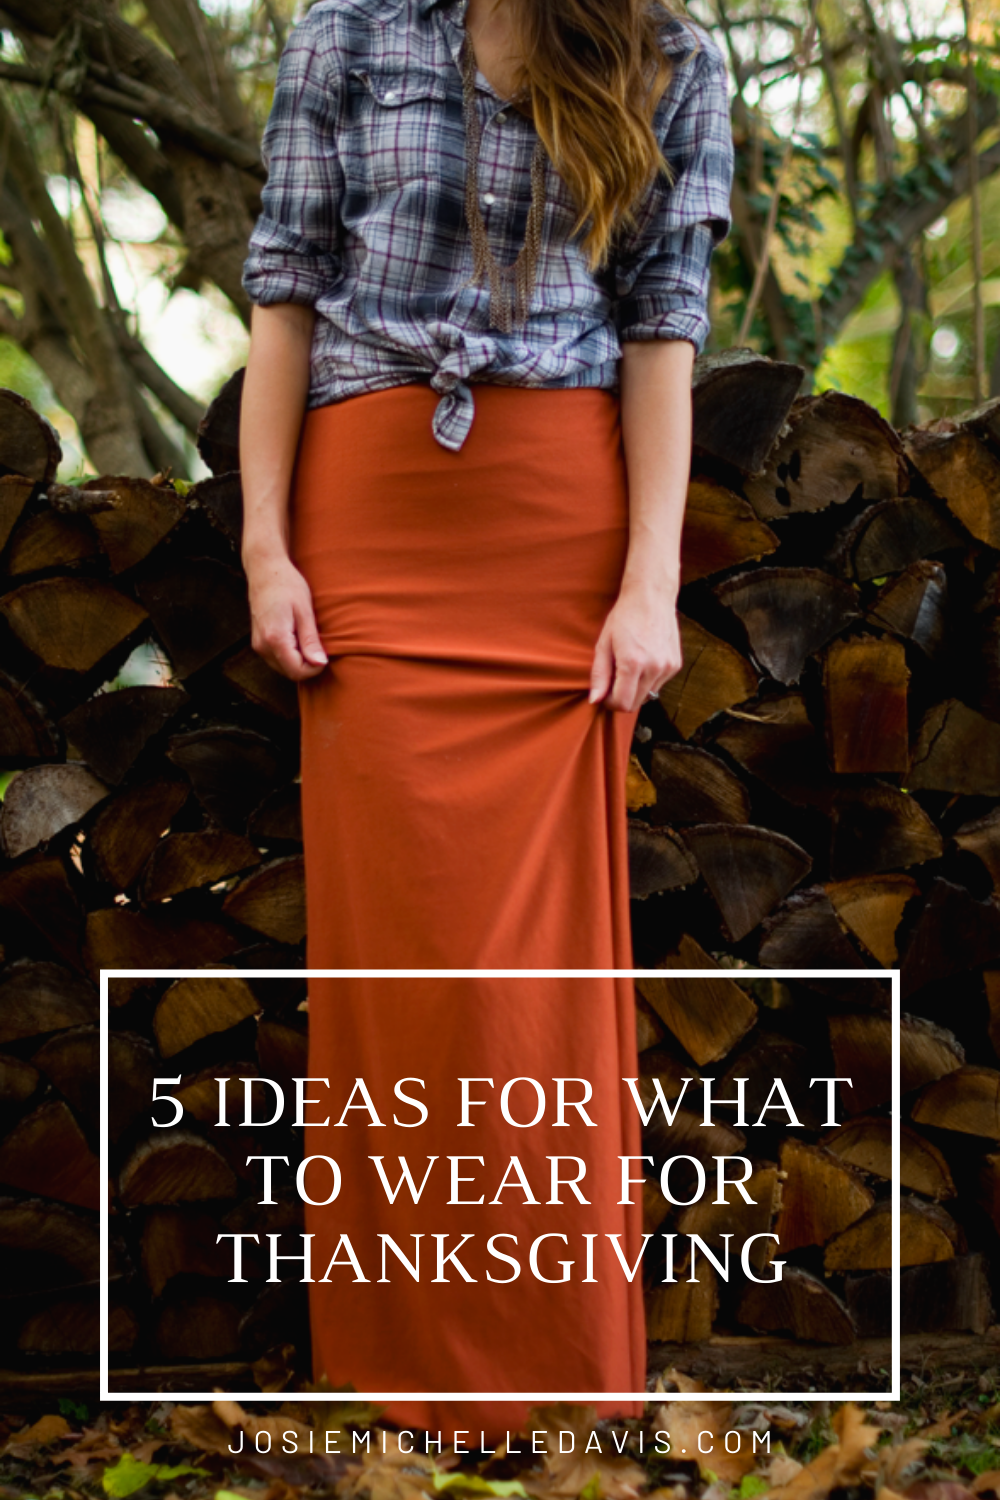 5 Ideas for what to wear for thanksgiving